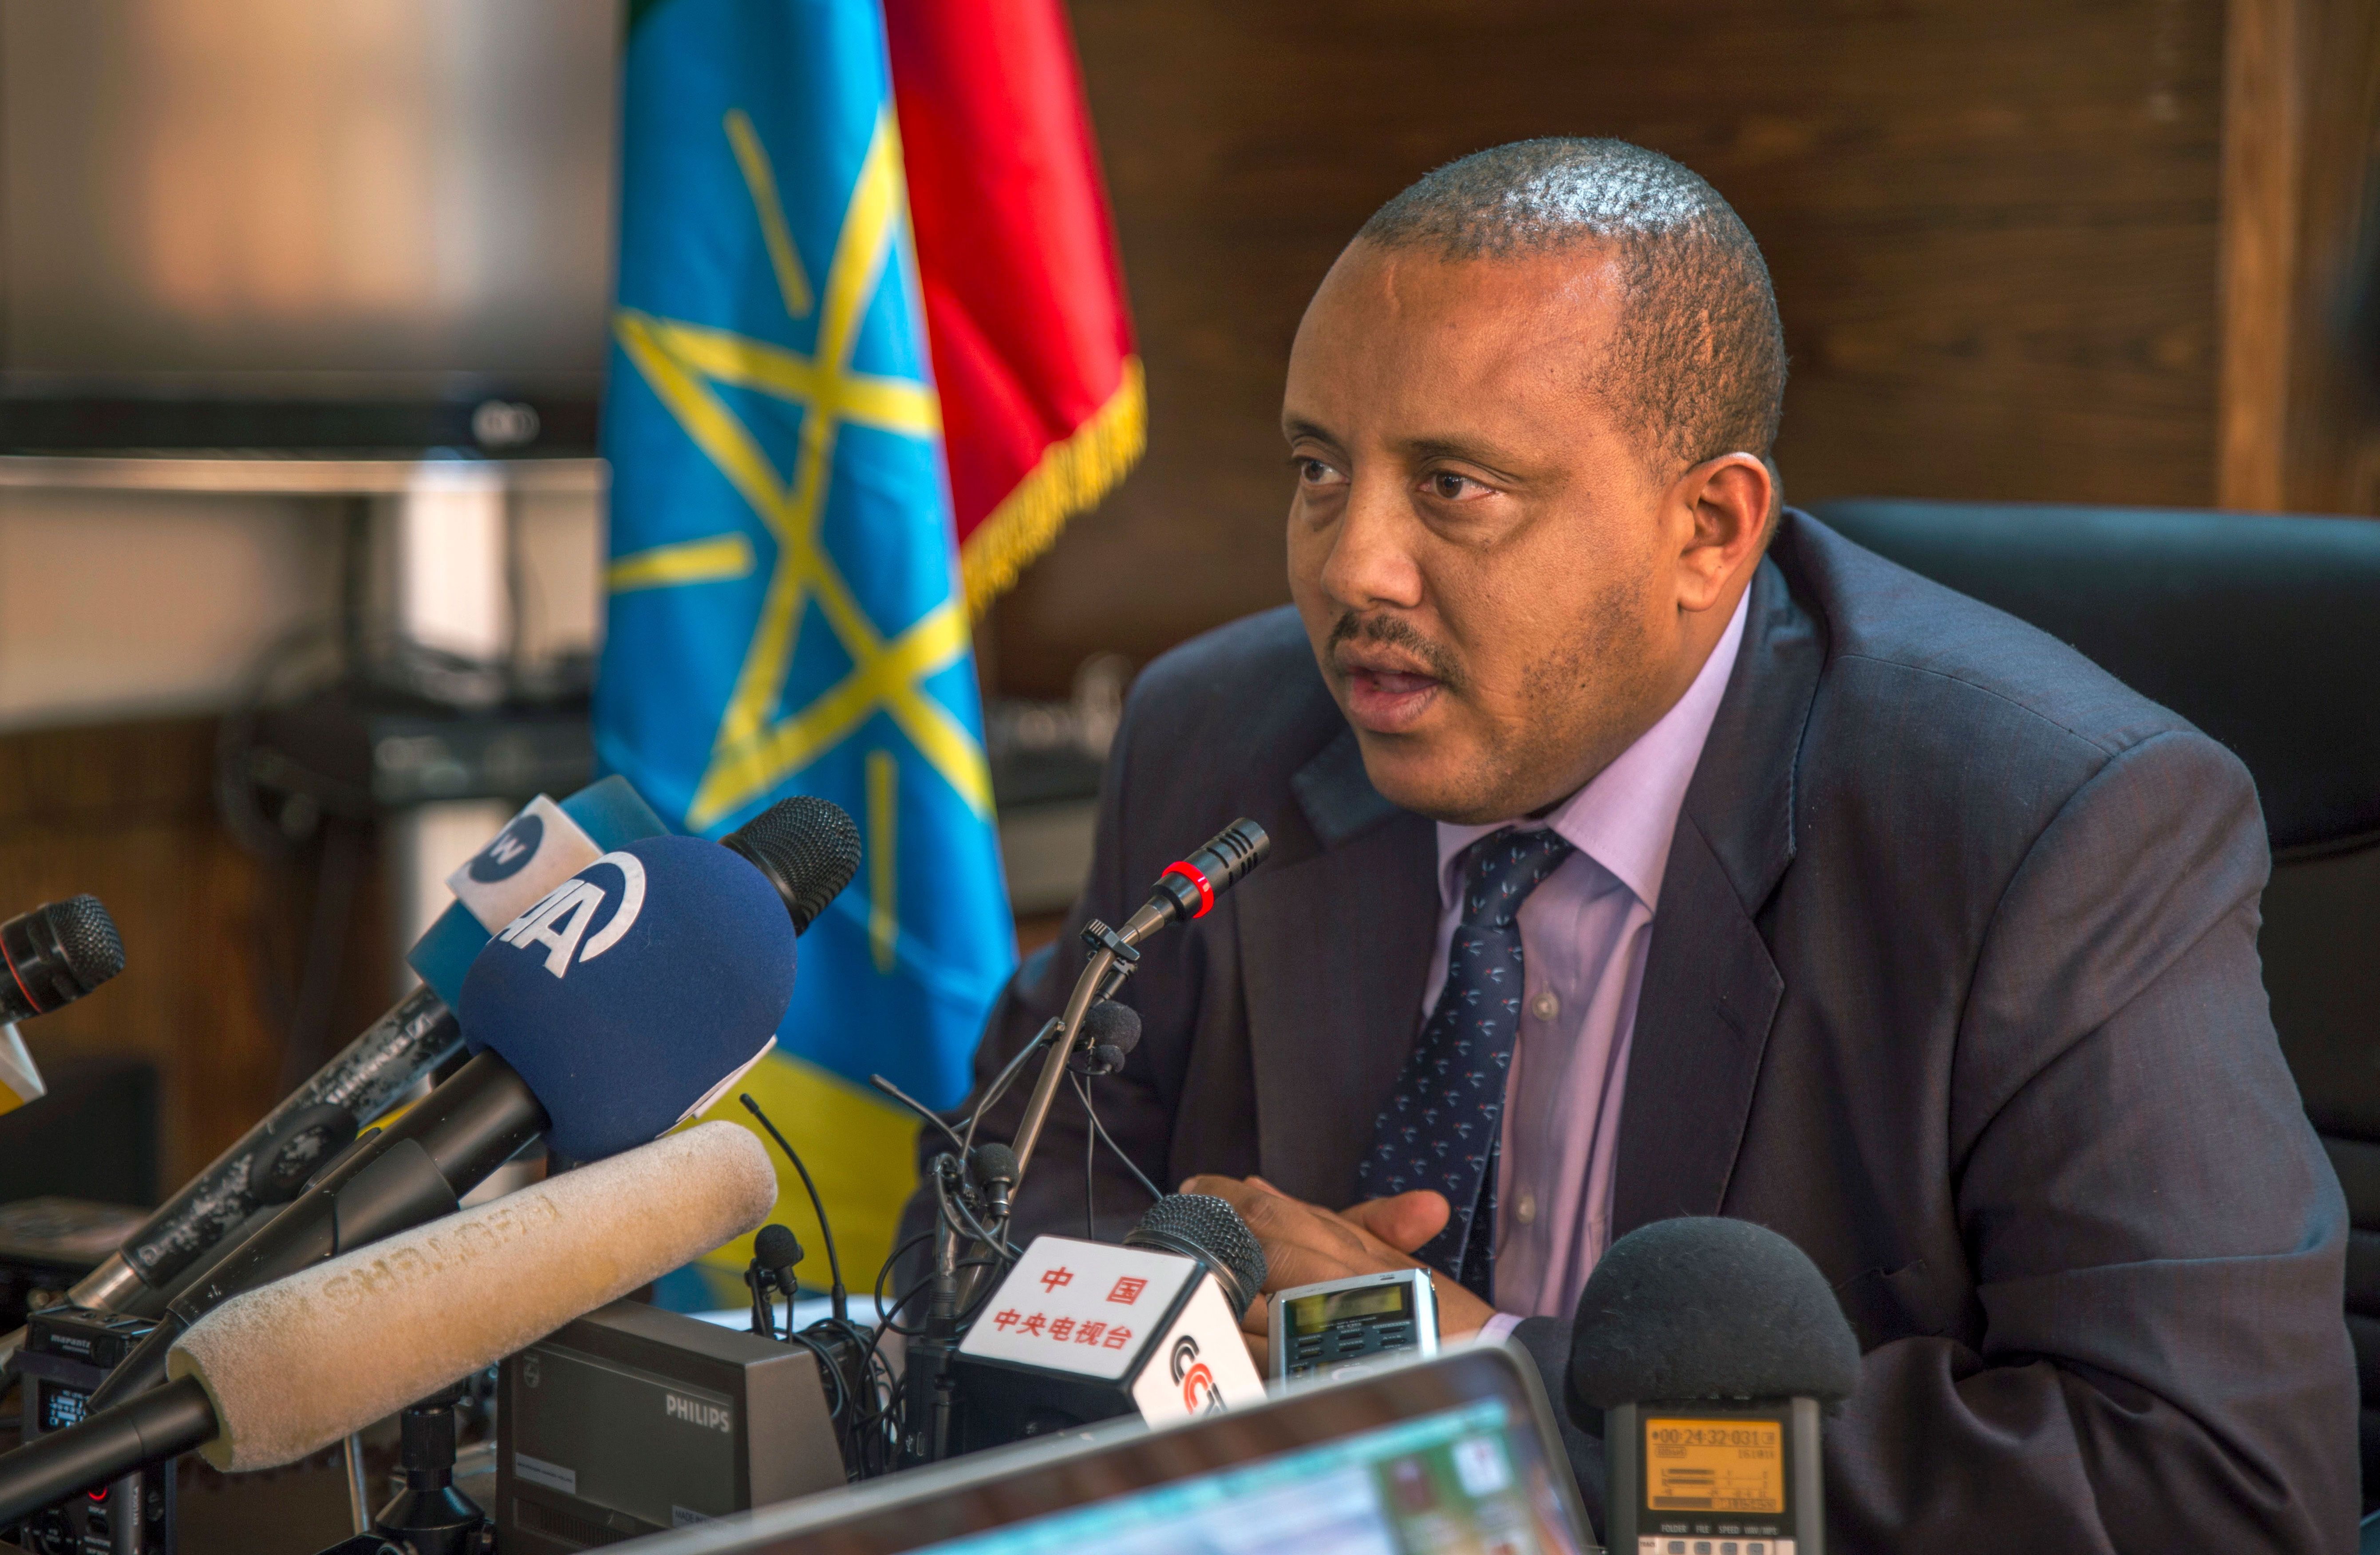 Getachew Reda, Ethiopia's then government communication affairs minister, speaks to the media in Addis Ababa, Ethiopia, in October 2016. Reda is now a spokesman for Tigray's former ruling party, the Tigray People's Liberation Front (TPLF).